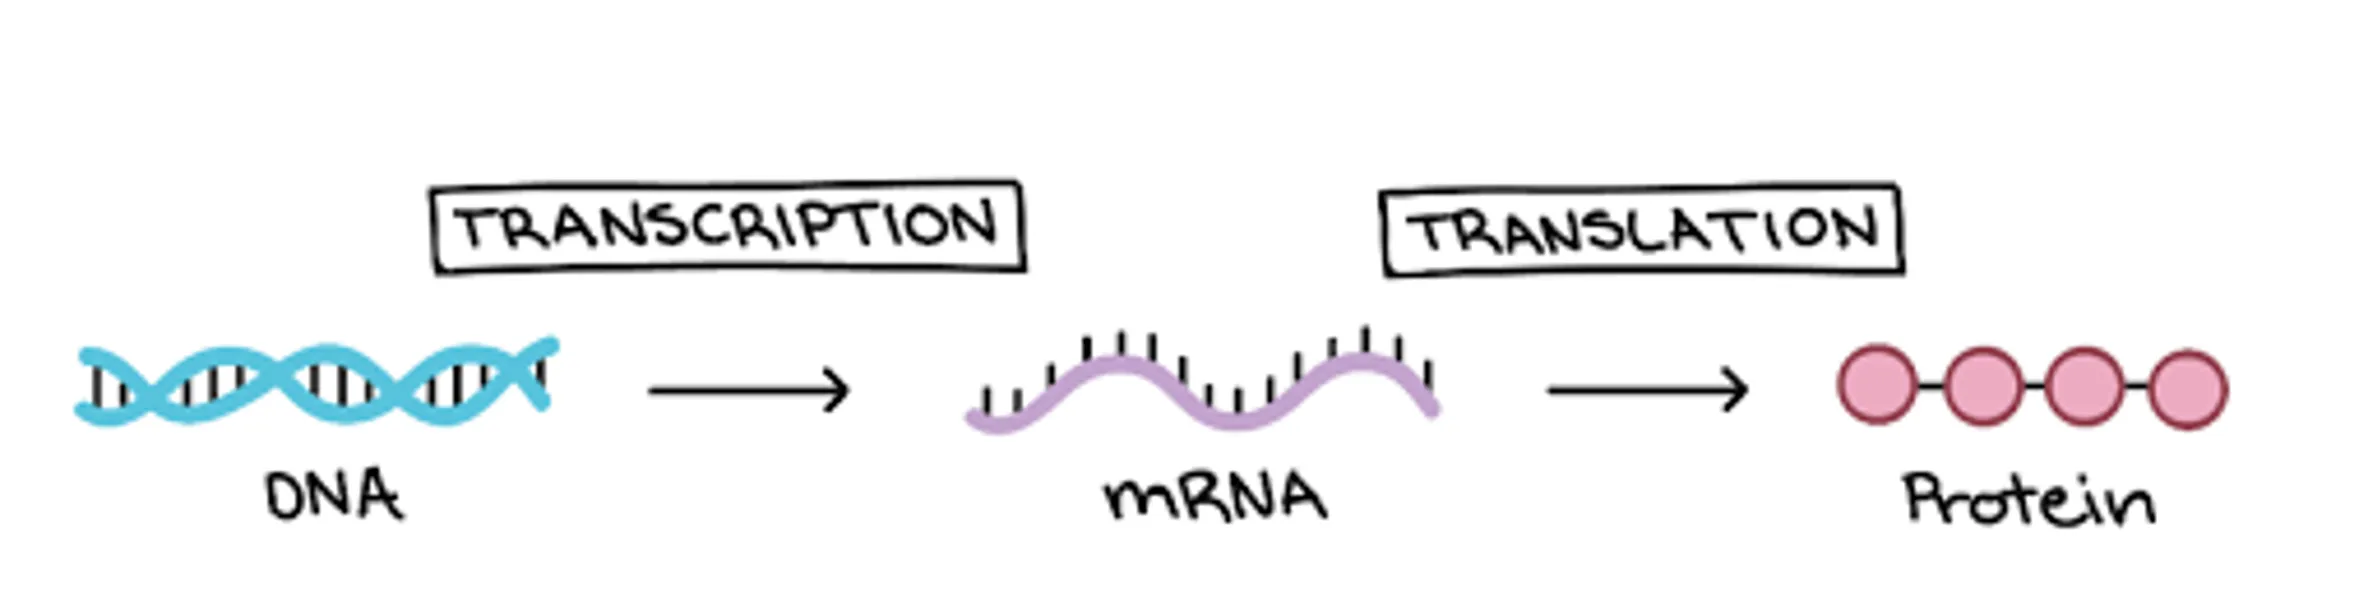 The Central Dogma of molecular biology